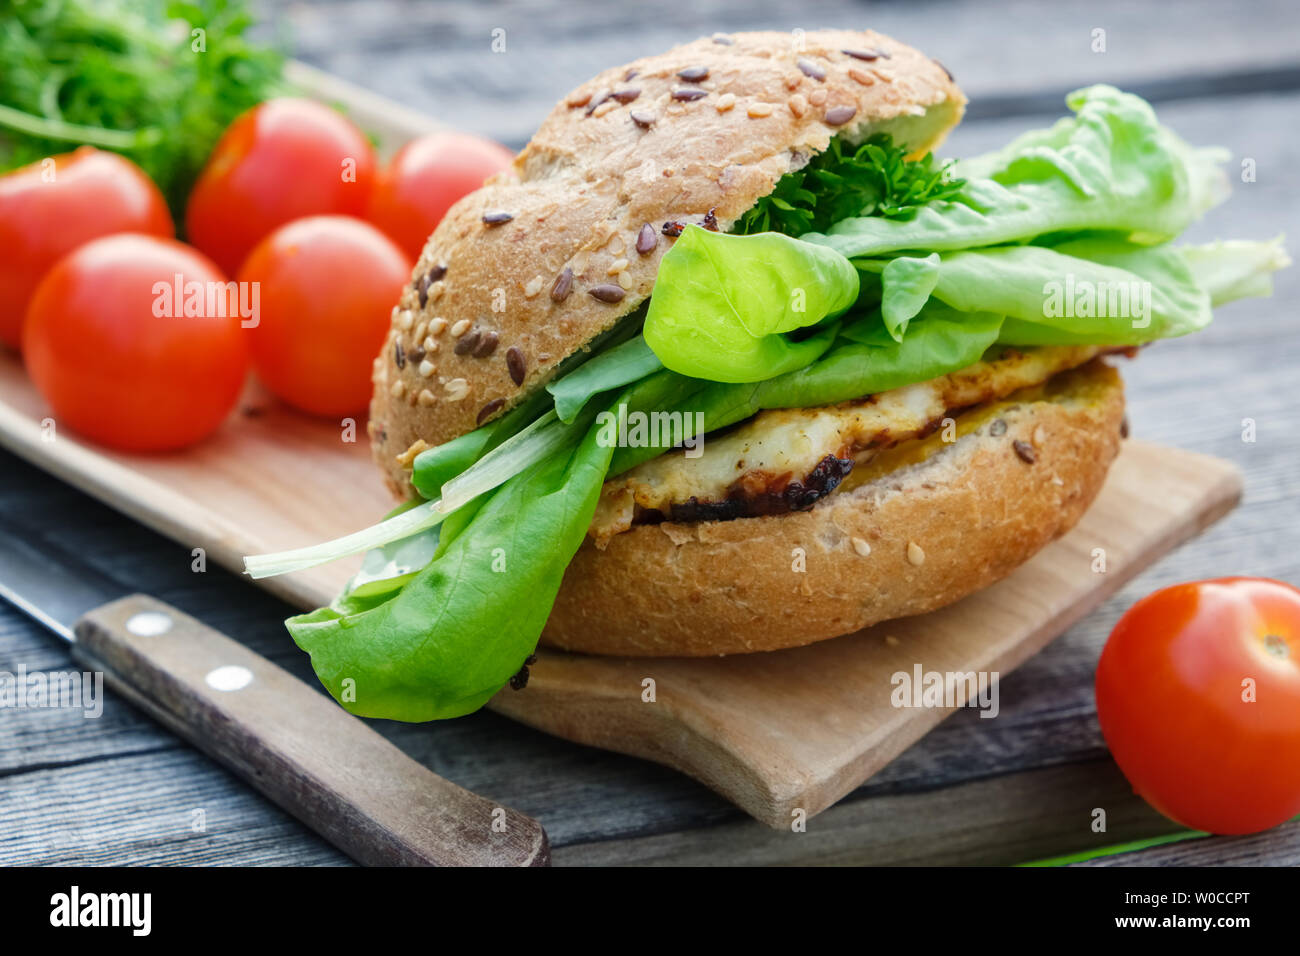 Tasty homemade burger with meat, lettuce, tomatoes, sesame bun on wooden picnic table outdoors. Stock Photo